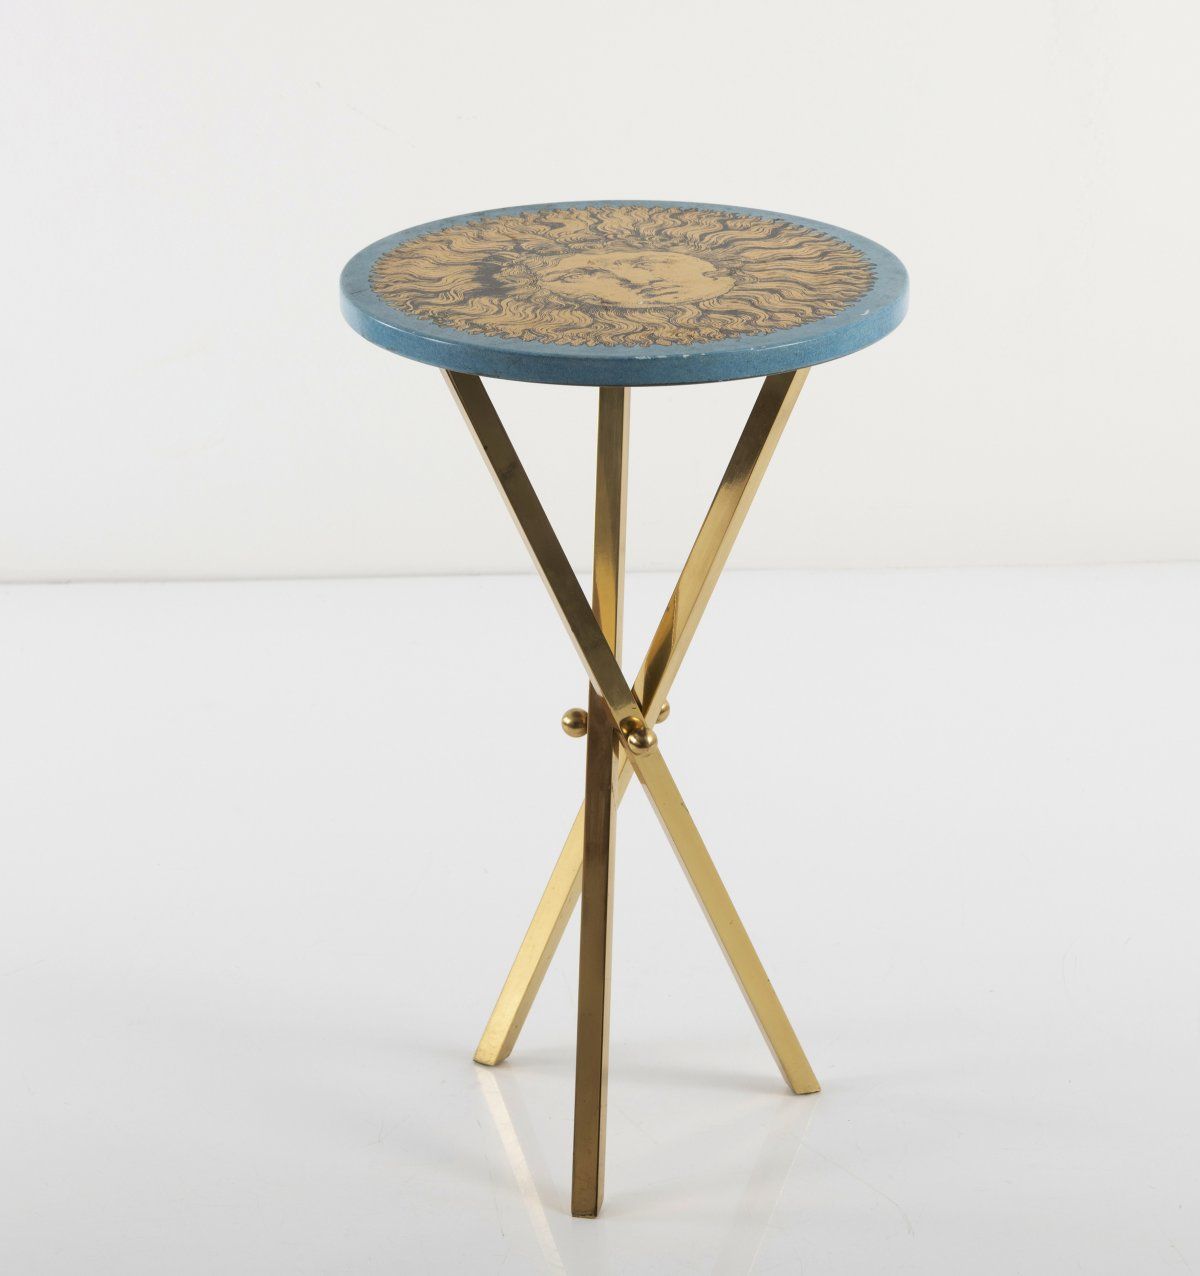 Null Piero Fornasetti, 'Sole' end table, 1950s, H. 60 cm, D. 36 cm. Made by Forn&hellip;